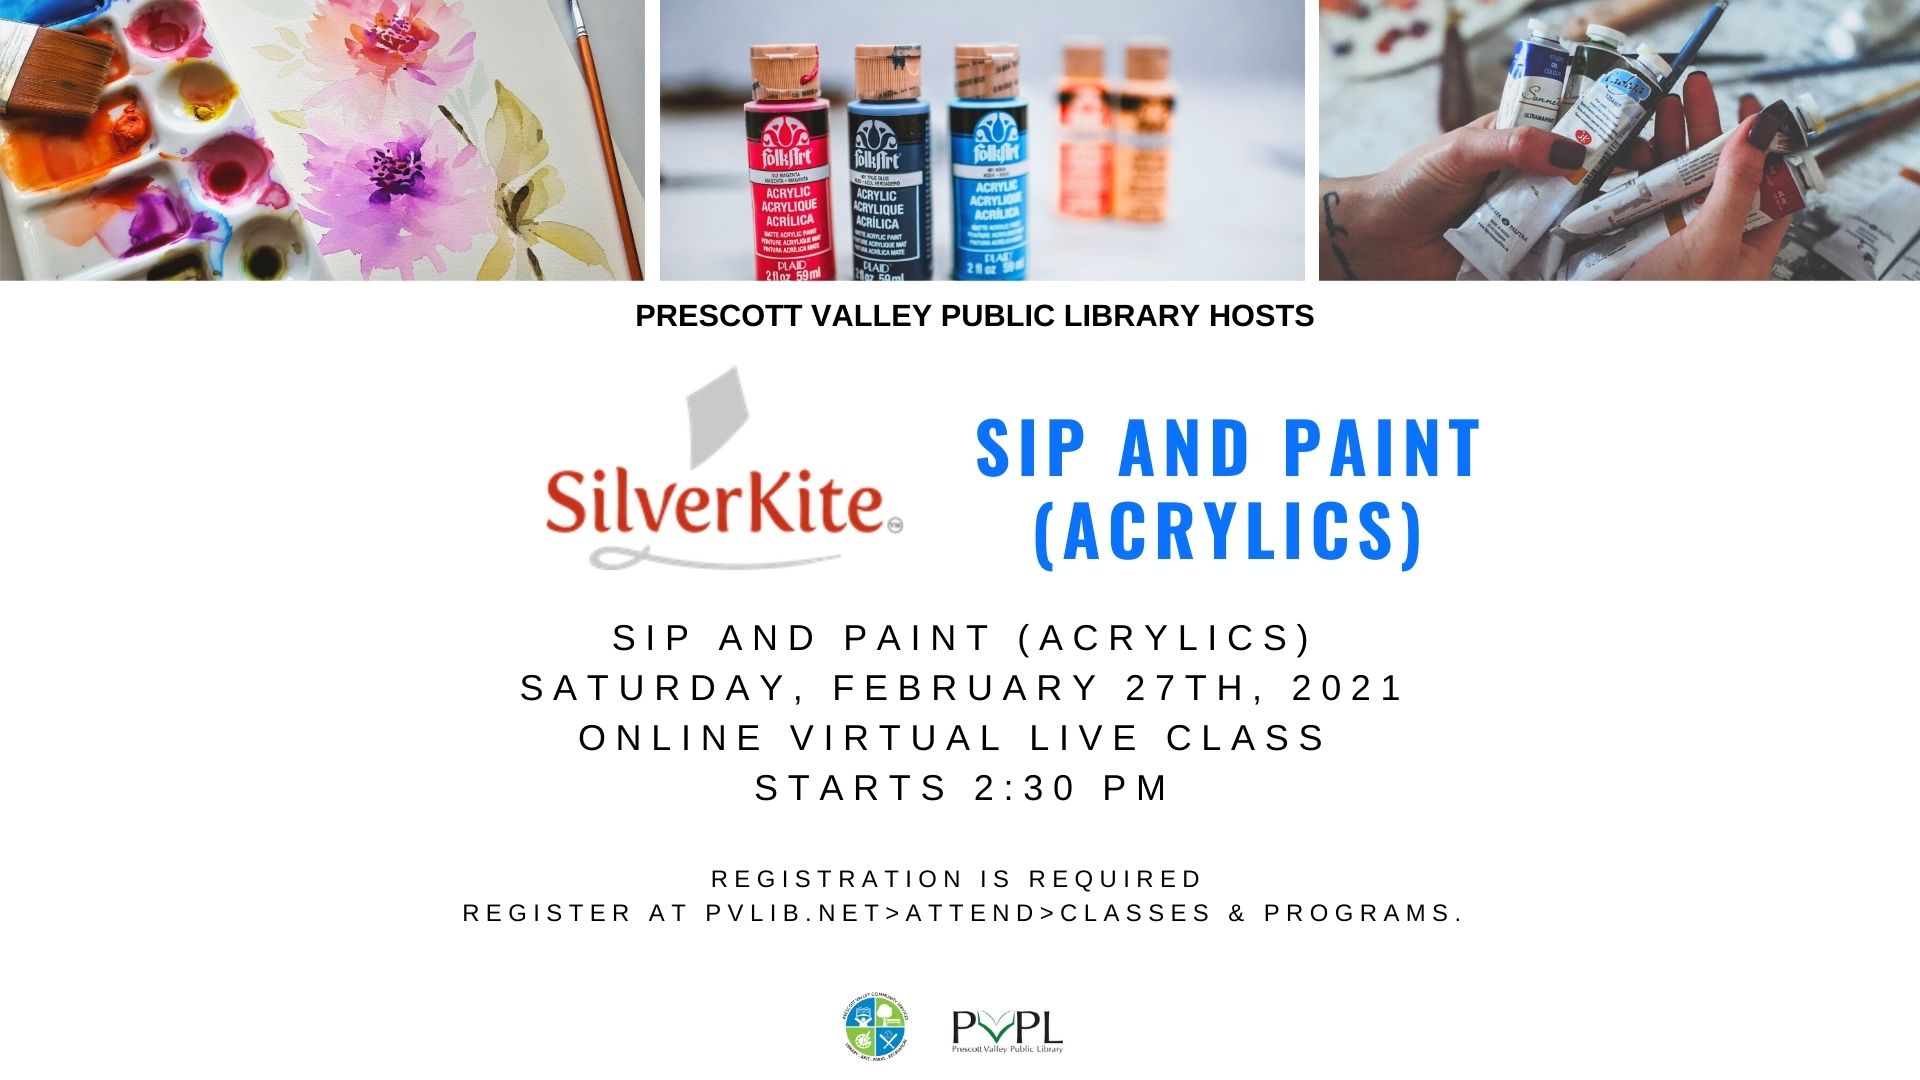 SilverKite Community Arts Class ‘Sip and Paint (Acrylics)’ – Registration Required – Virtual Online Live Class